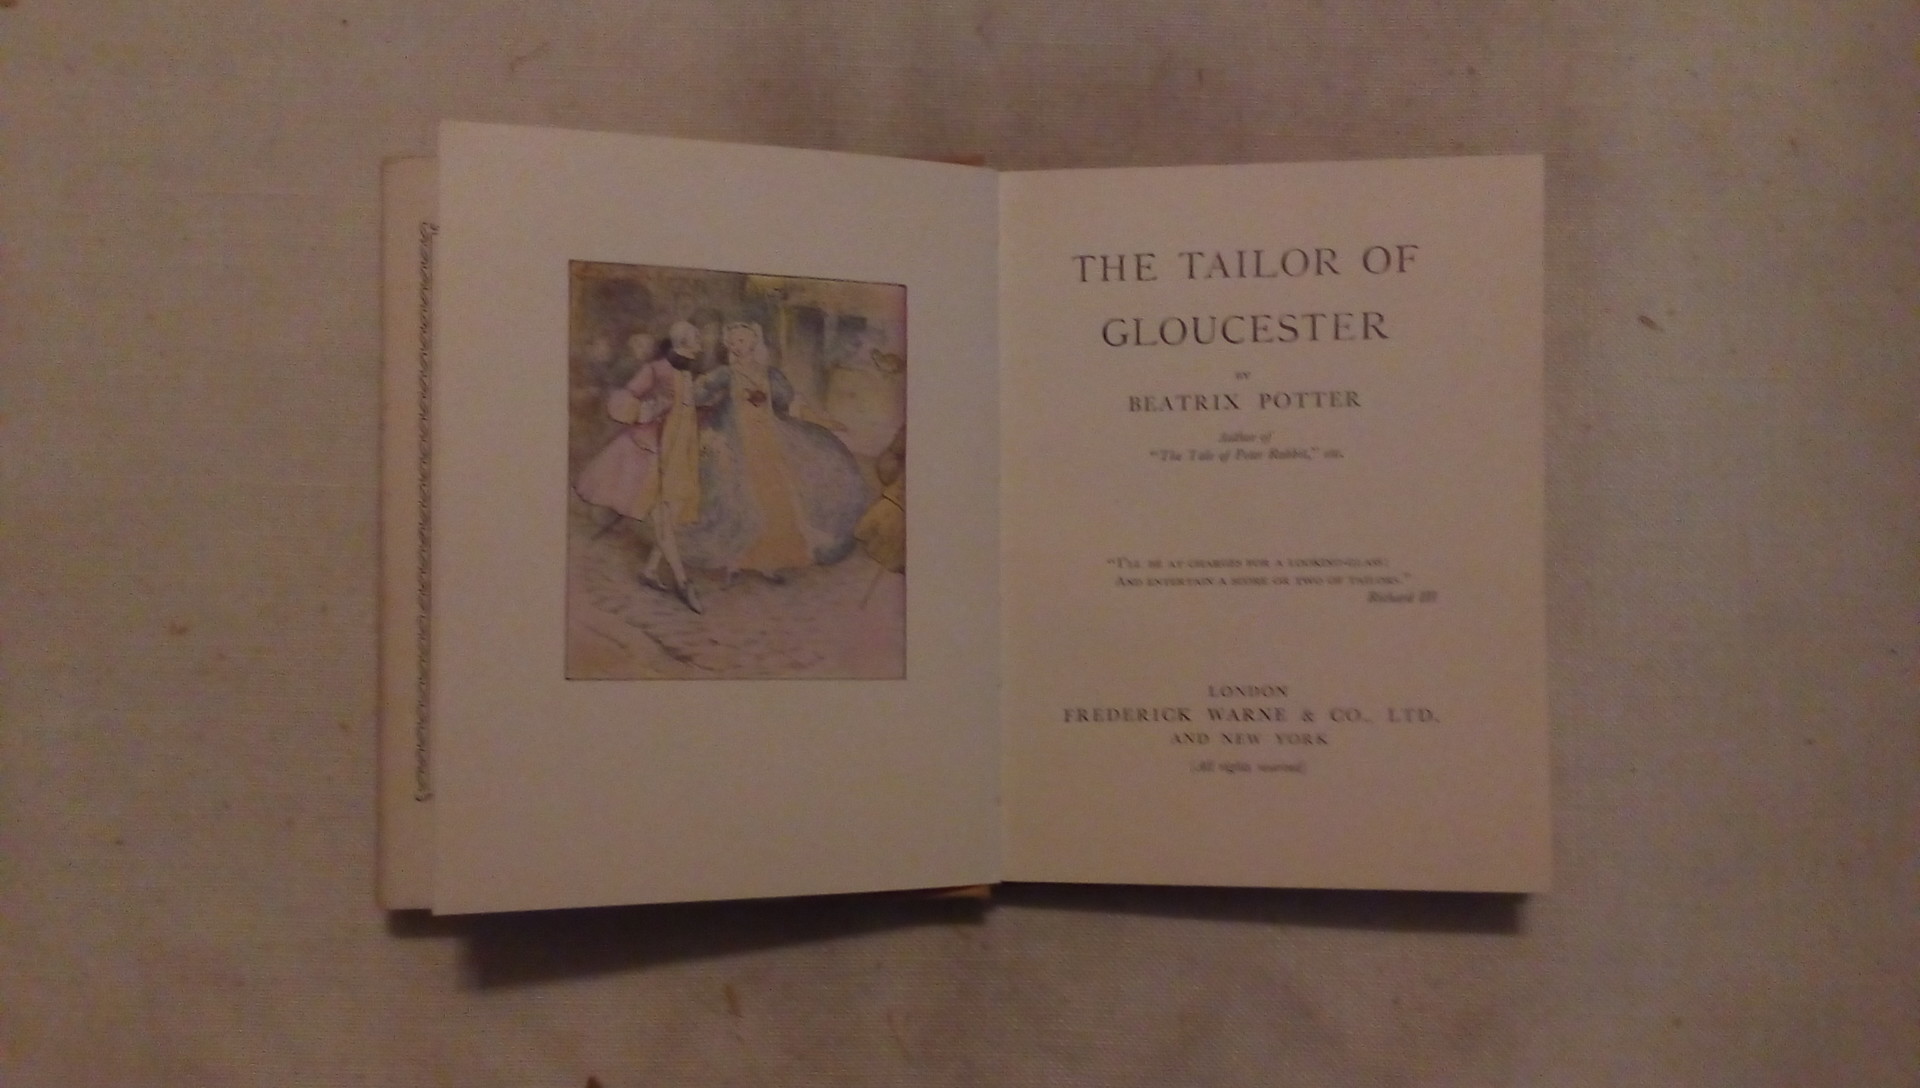 The tailor of glouchester - Beatrix Potter - F. Warne & C.